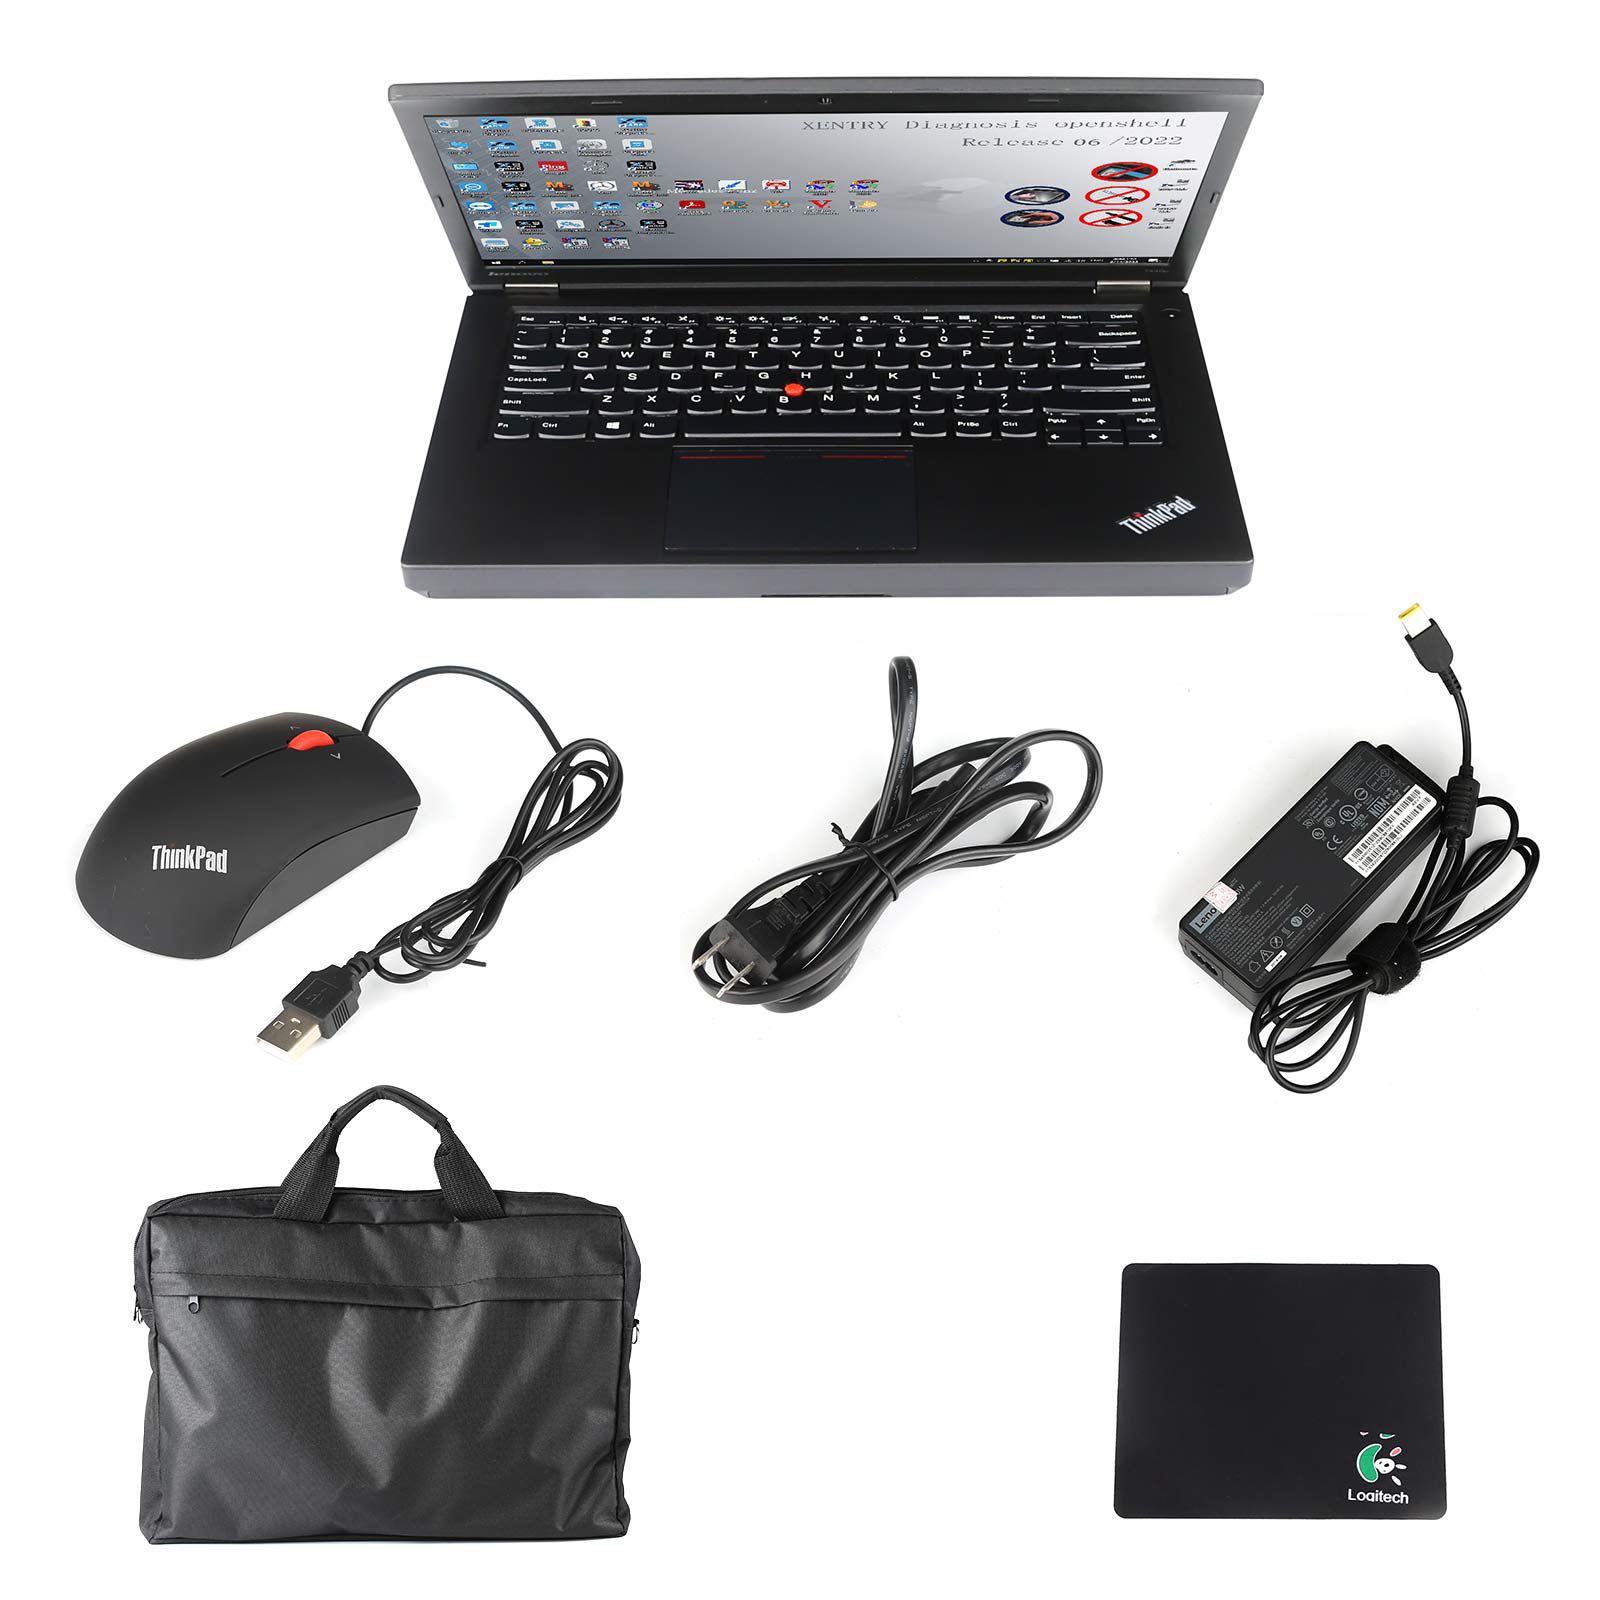 V2023.3 MB SD C4 Plus Support Doip with SSD Plus Lenovo T440P Laptop I7 8GB Laptop Software Installed Ready to Use Free Shipping by DHL